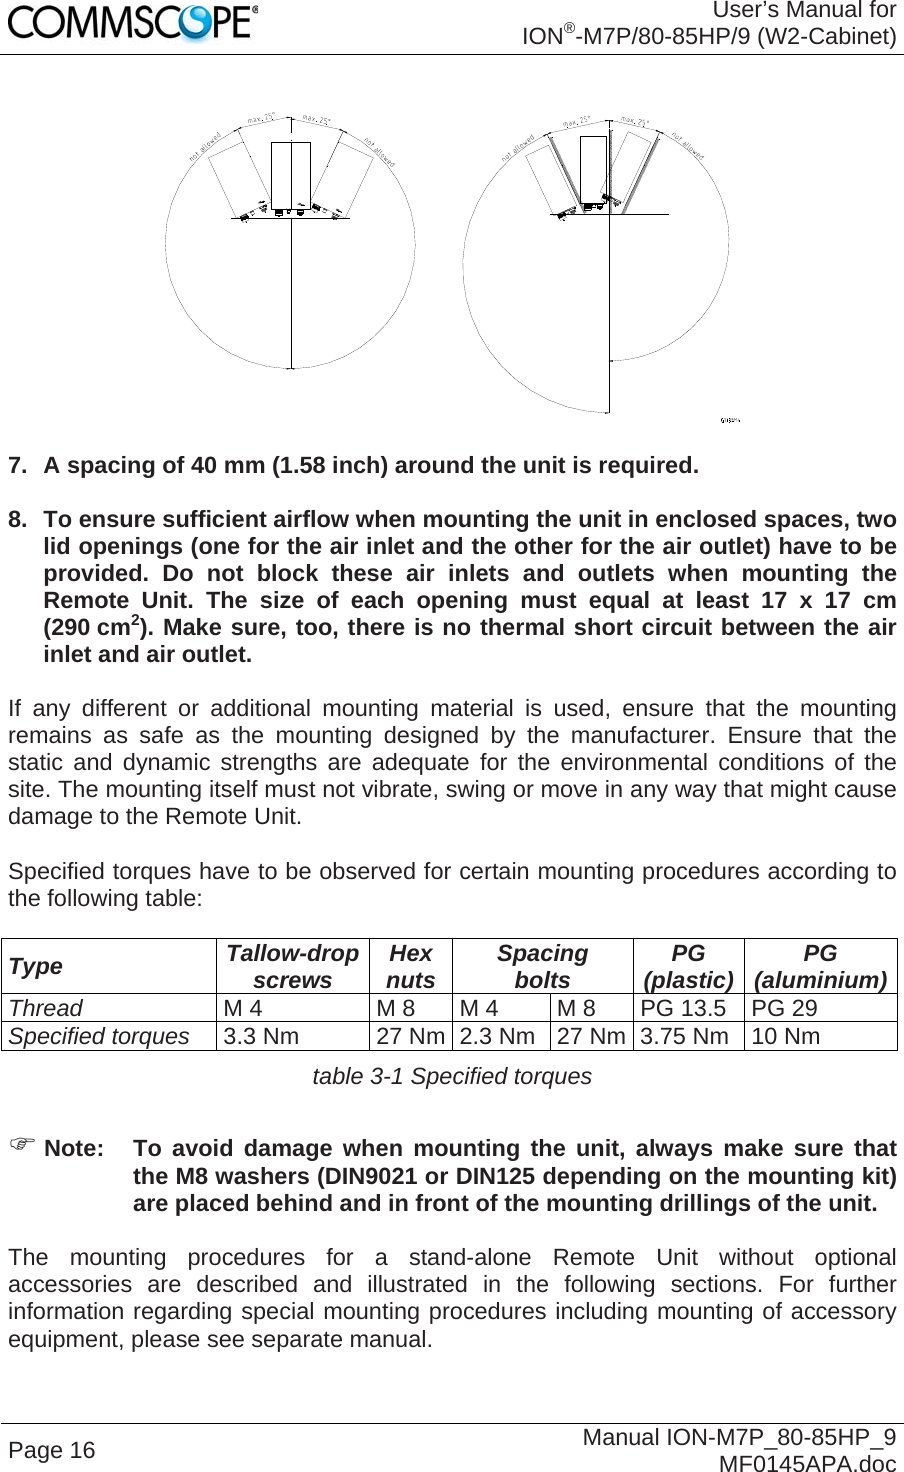 User’s Manual for ION®-M7P/80-85HP/9 (W2-Cabinet) Page 16  Manual ION-M7P_80-85HP_9 MF0145APA.doc    7.  A spacing of 40 mm (1.58 inch) around the unit is required.  8.  To ensure sufficient airflow when mounting the unit in enclosed spaces, two lid openings (one for the air inlet and the other for the air outlet) have to be provided. Do not block these air inlets and outlets when mounting the Remote Unit. The size of each opening must equal at least 17 x 17 cm (290 cm2). Make sure, too, there is no thermal short circuit between the air inlet and air outlet.   If any different or additional mounting material is used, ensure that the mounting remains as safe as the mounting designed by the manufacturer. Ensure that the static and dynamic strengths are adequate for the environmental conditions of the site. The mounting itself must not vibrate, swing or move in any way that might cause damage to the Remote Unit.  Specified torques have to be observed for certain mounting procedures according to the following table:  Type  Tallow-drop screws  Hex nuts  Spacing bolts  PG (plastic)  PG (aluminium)Thread M 4  M 8  M 4  M 8  PG 13.5  PG 29 Specified torques 3.3 Nm  27 Nm 2.3 Nm  27 Nm 3.75 Nm  10 Nm table 3-1 Specified torques   Note:  To avoid damage when mounting the unit, always make sure that the M8 washers (DIN9021 or DIN125 depending on the mounting kit) are placed behind and in front of the mounting drillings of the unit.  The mounting procedures for a stand-alone Remote Unit without optional accessories are described and illustrated in the following sections. For further information regarding special mounting procedures including mounting of accessory equipment, please see separate manual.  